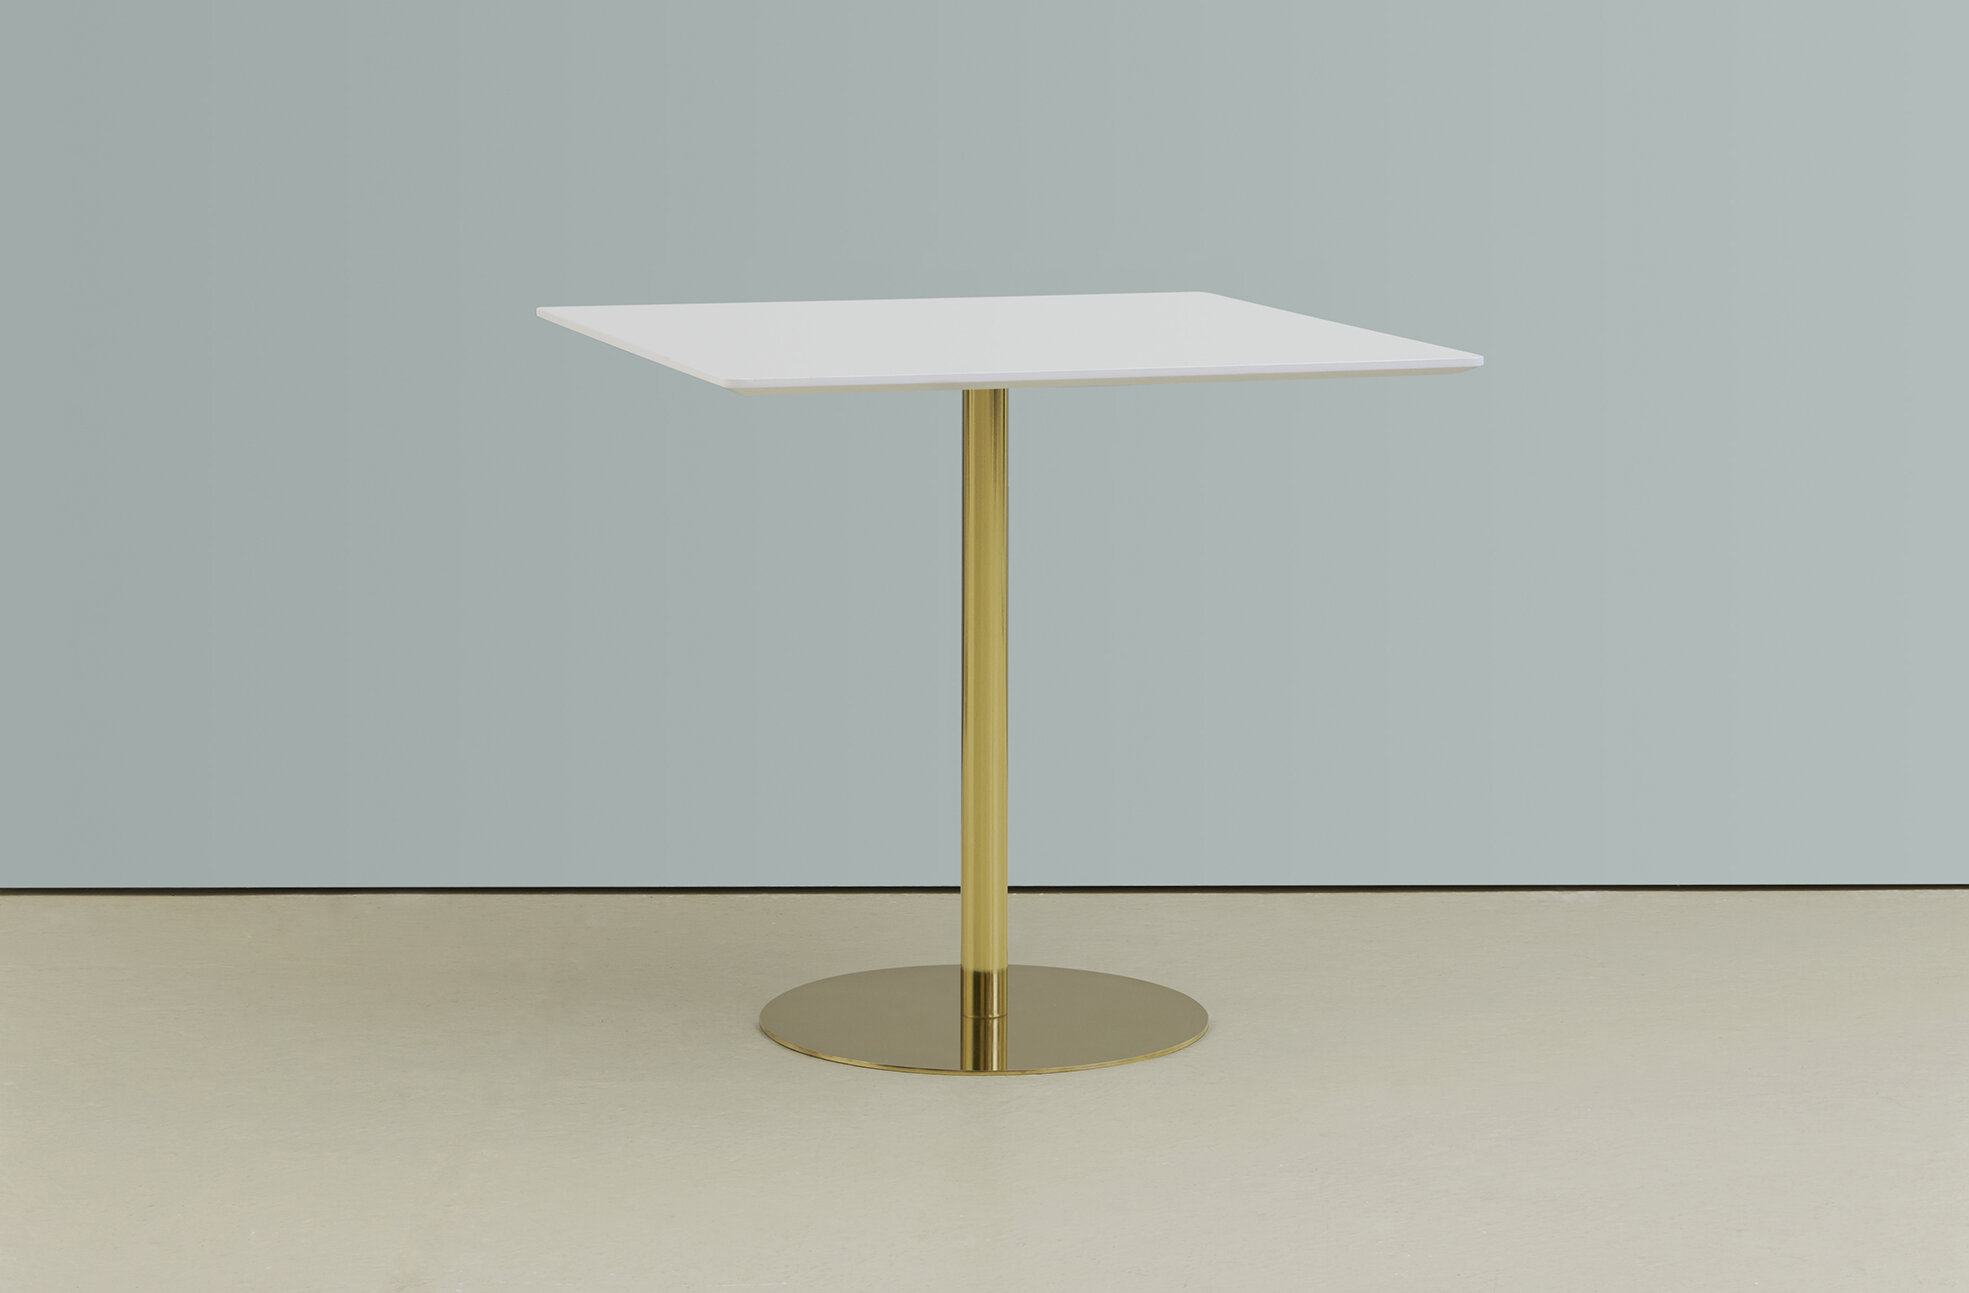 hm20r (polished brass base, white top) (1) (low res).jpg